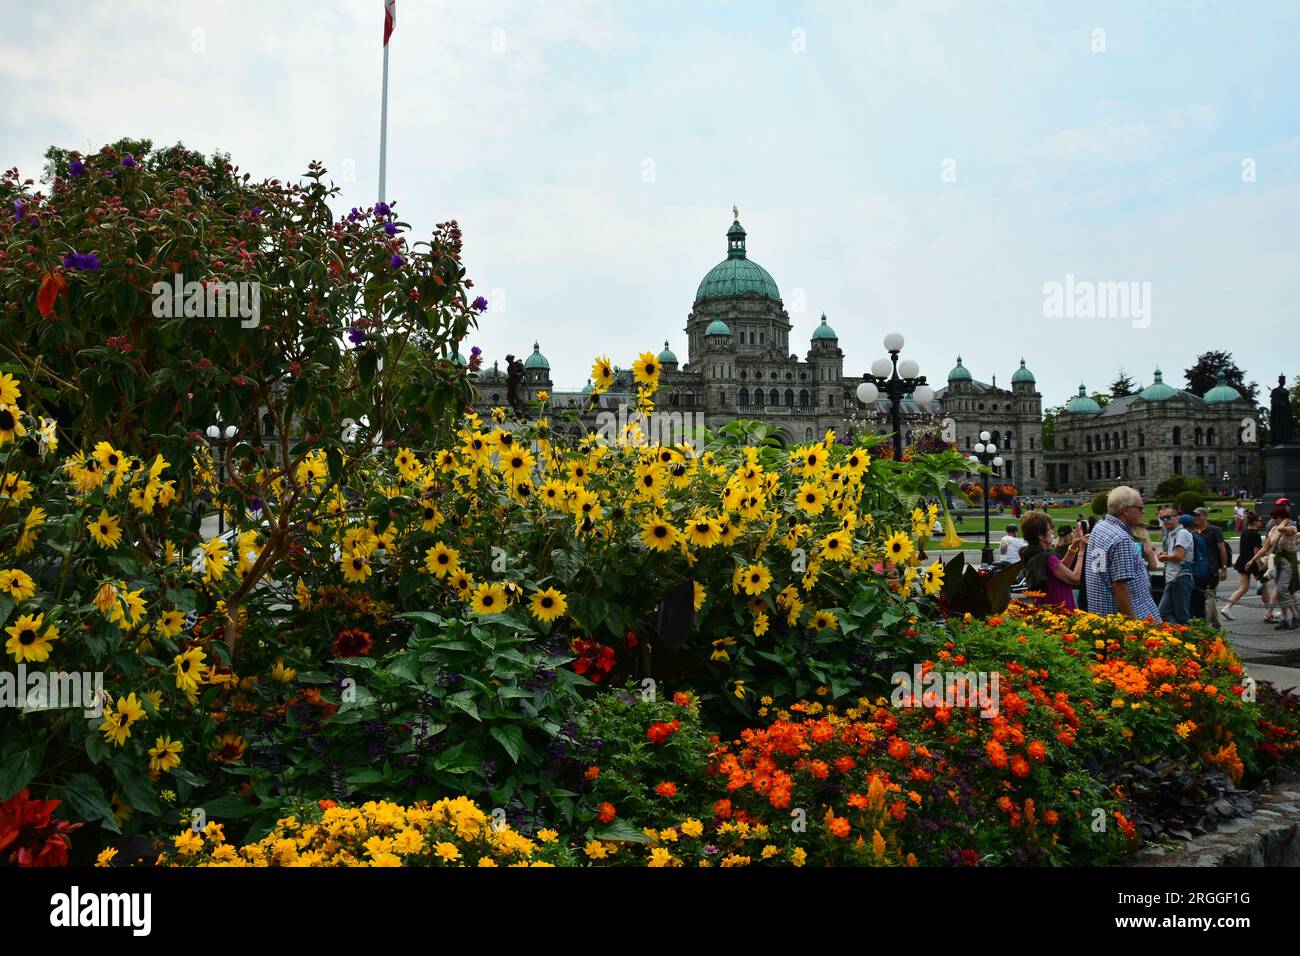 The parliament buildings in Victoria BC,  people on vacation in Victoria. Stock Photo